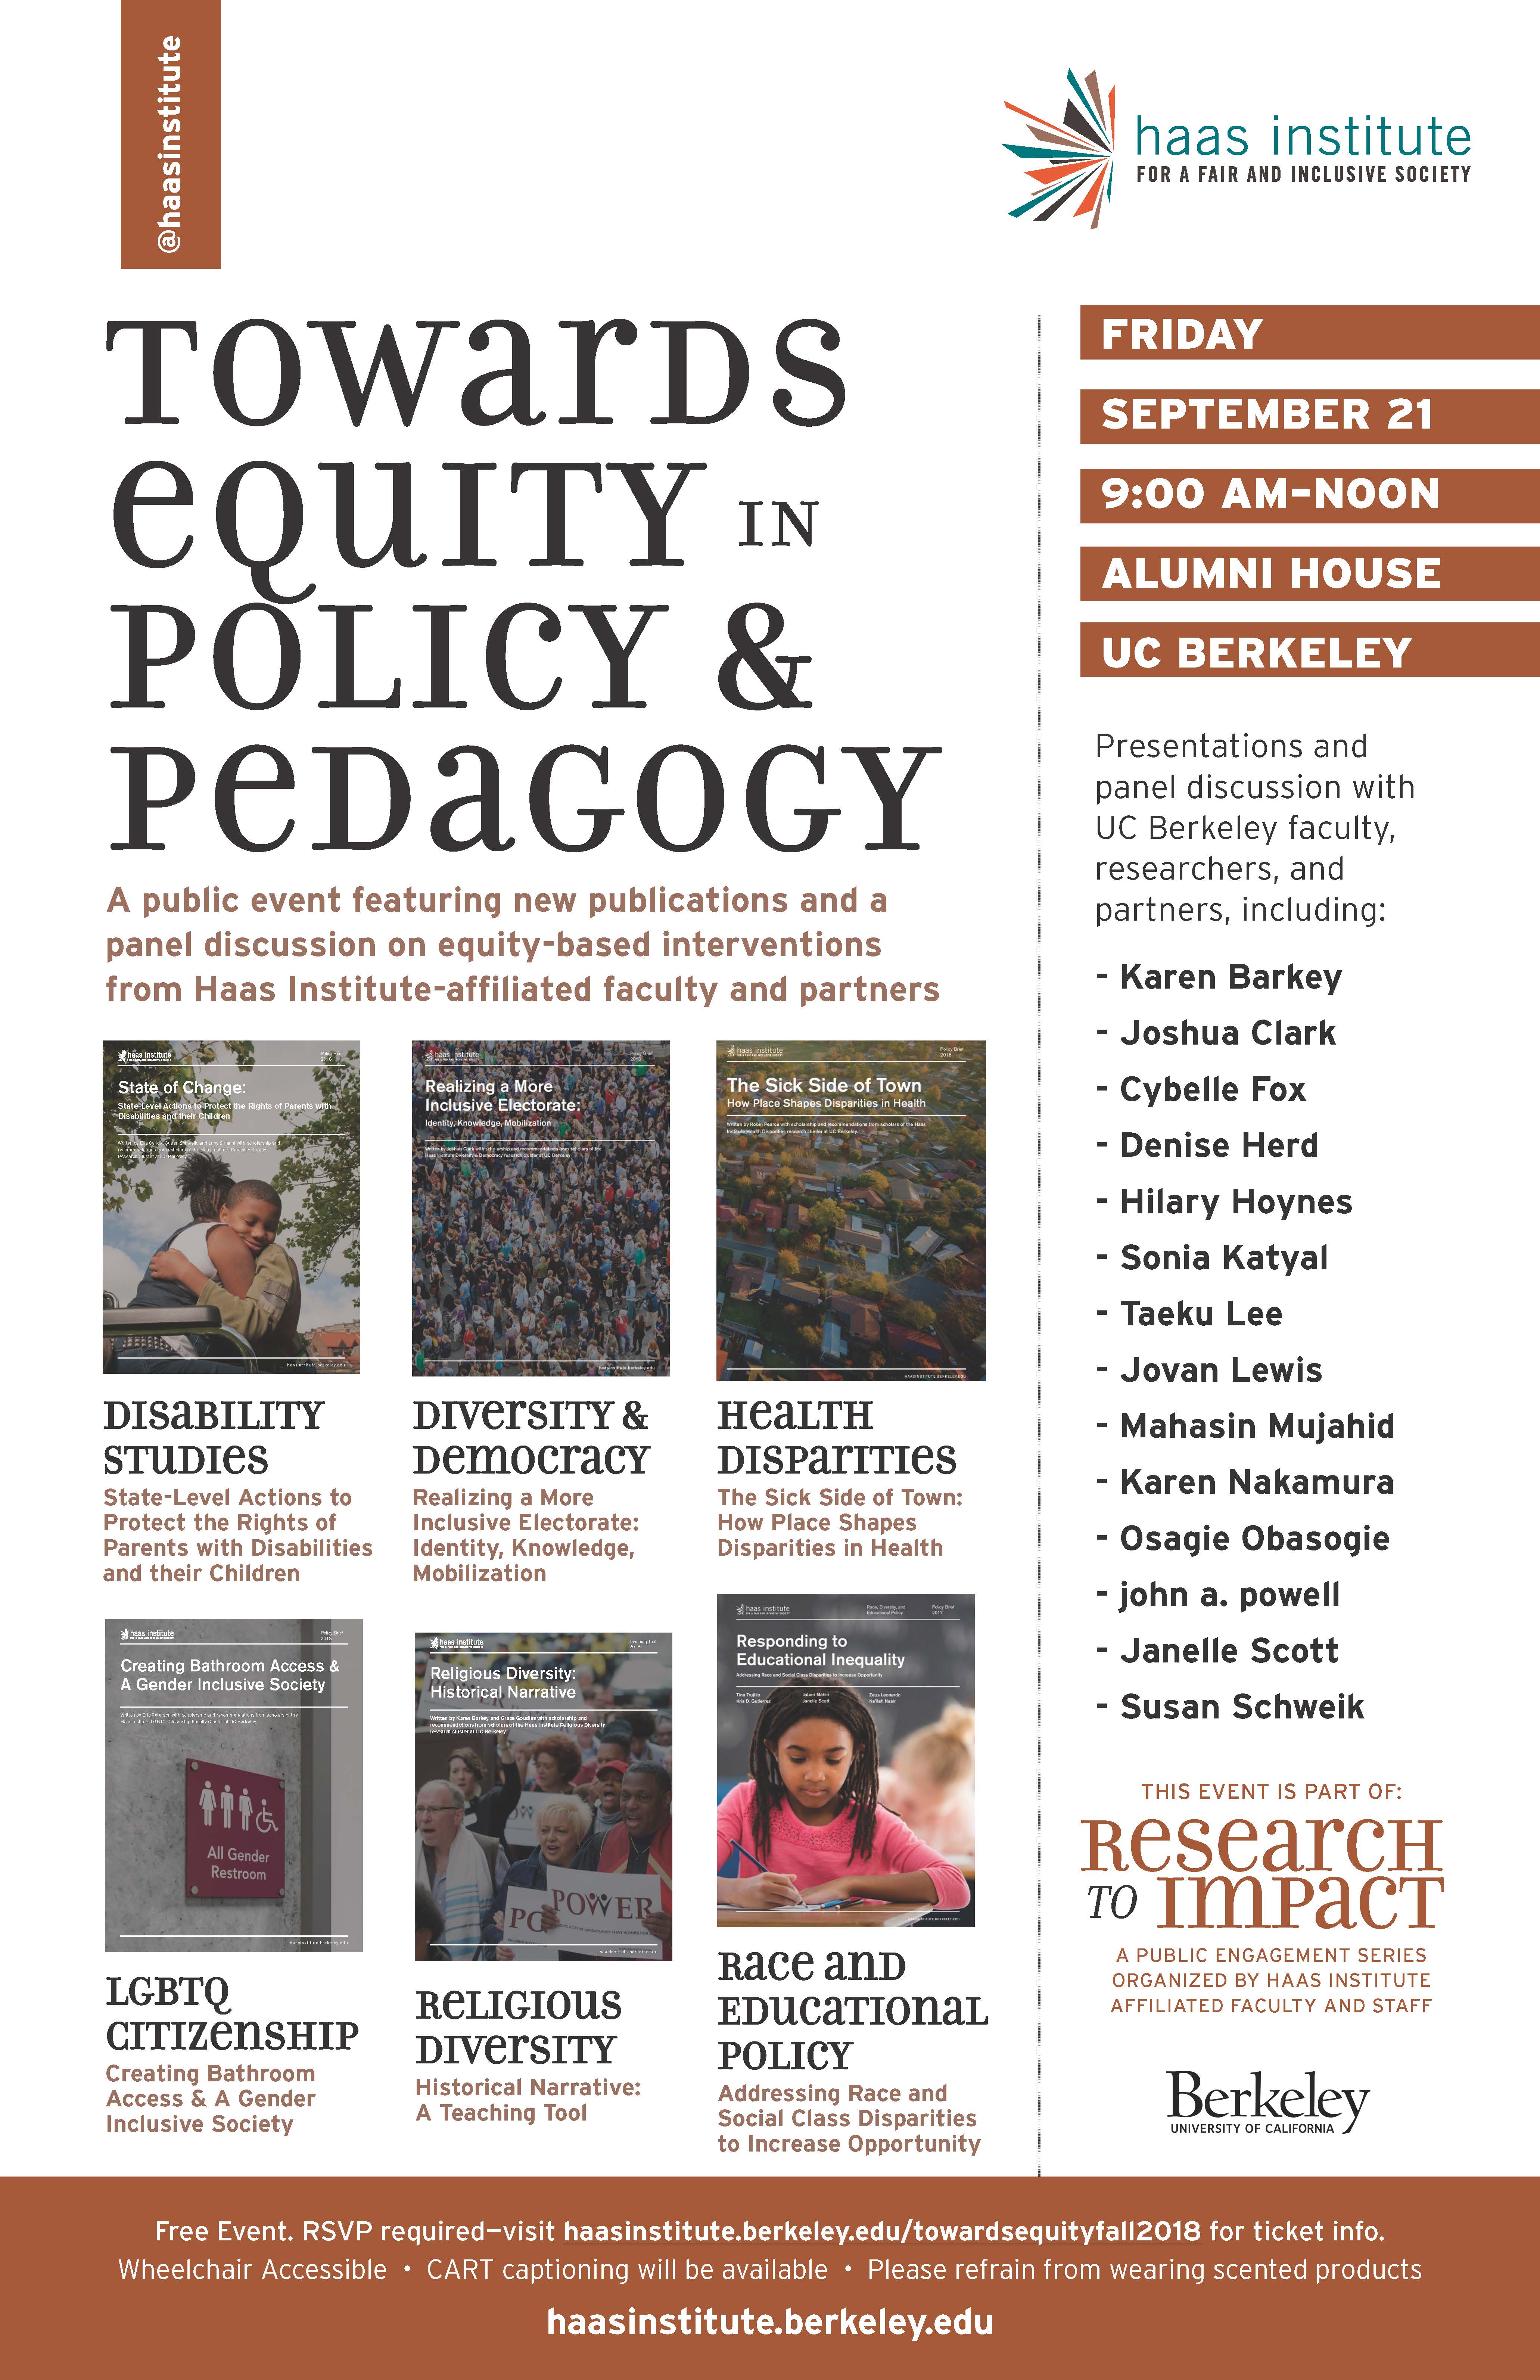 Image on Towards Equity in Policy and Pedagogy